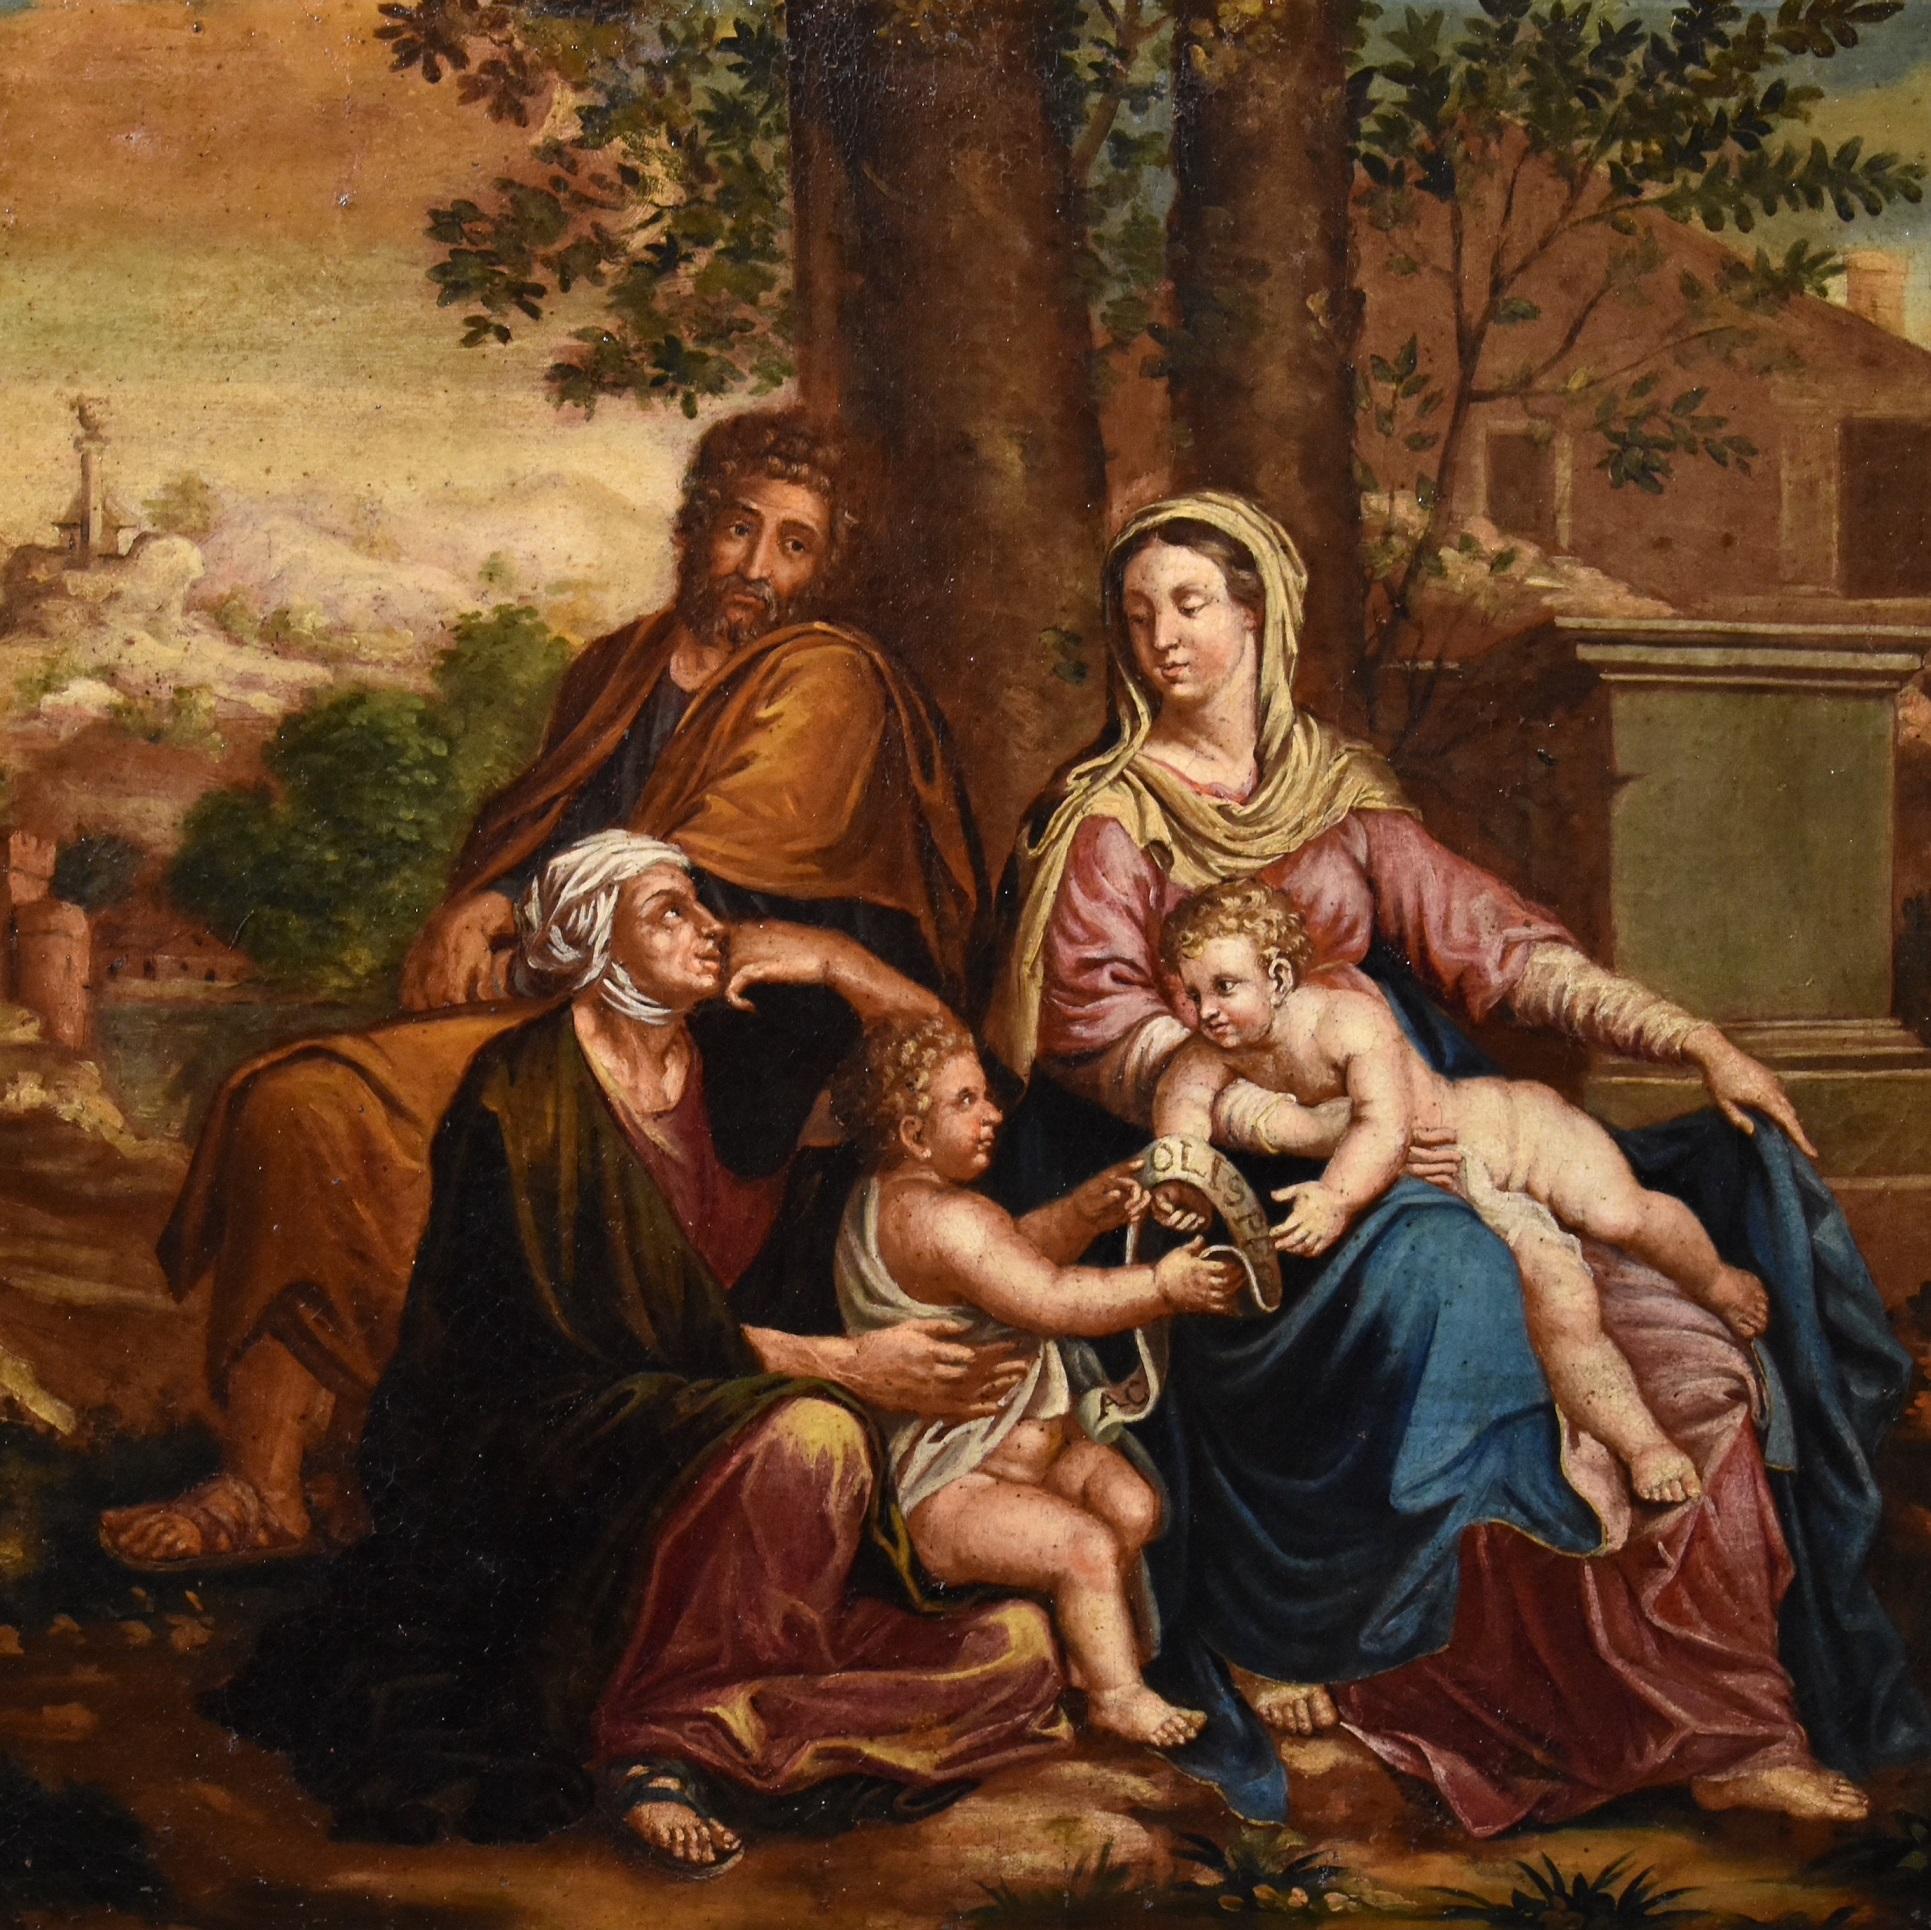 Holy Family Poussin Paint Oil on canvas Old master 17th Century Religious Art - Brown Landscape Painting by Nicolas Poussin (Les Andelys 1594 - Rome 1665)